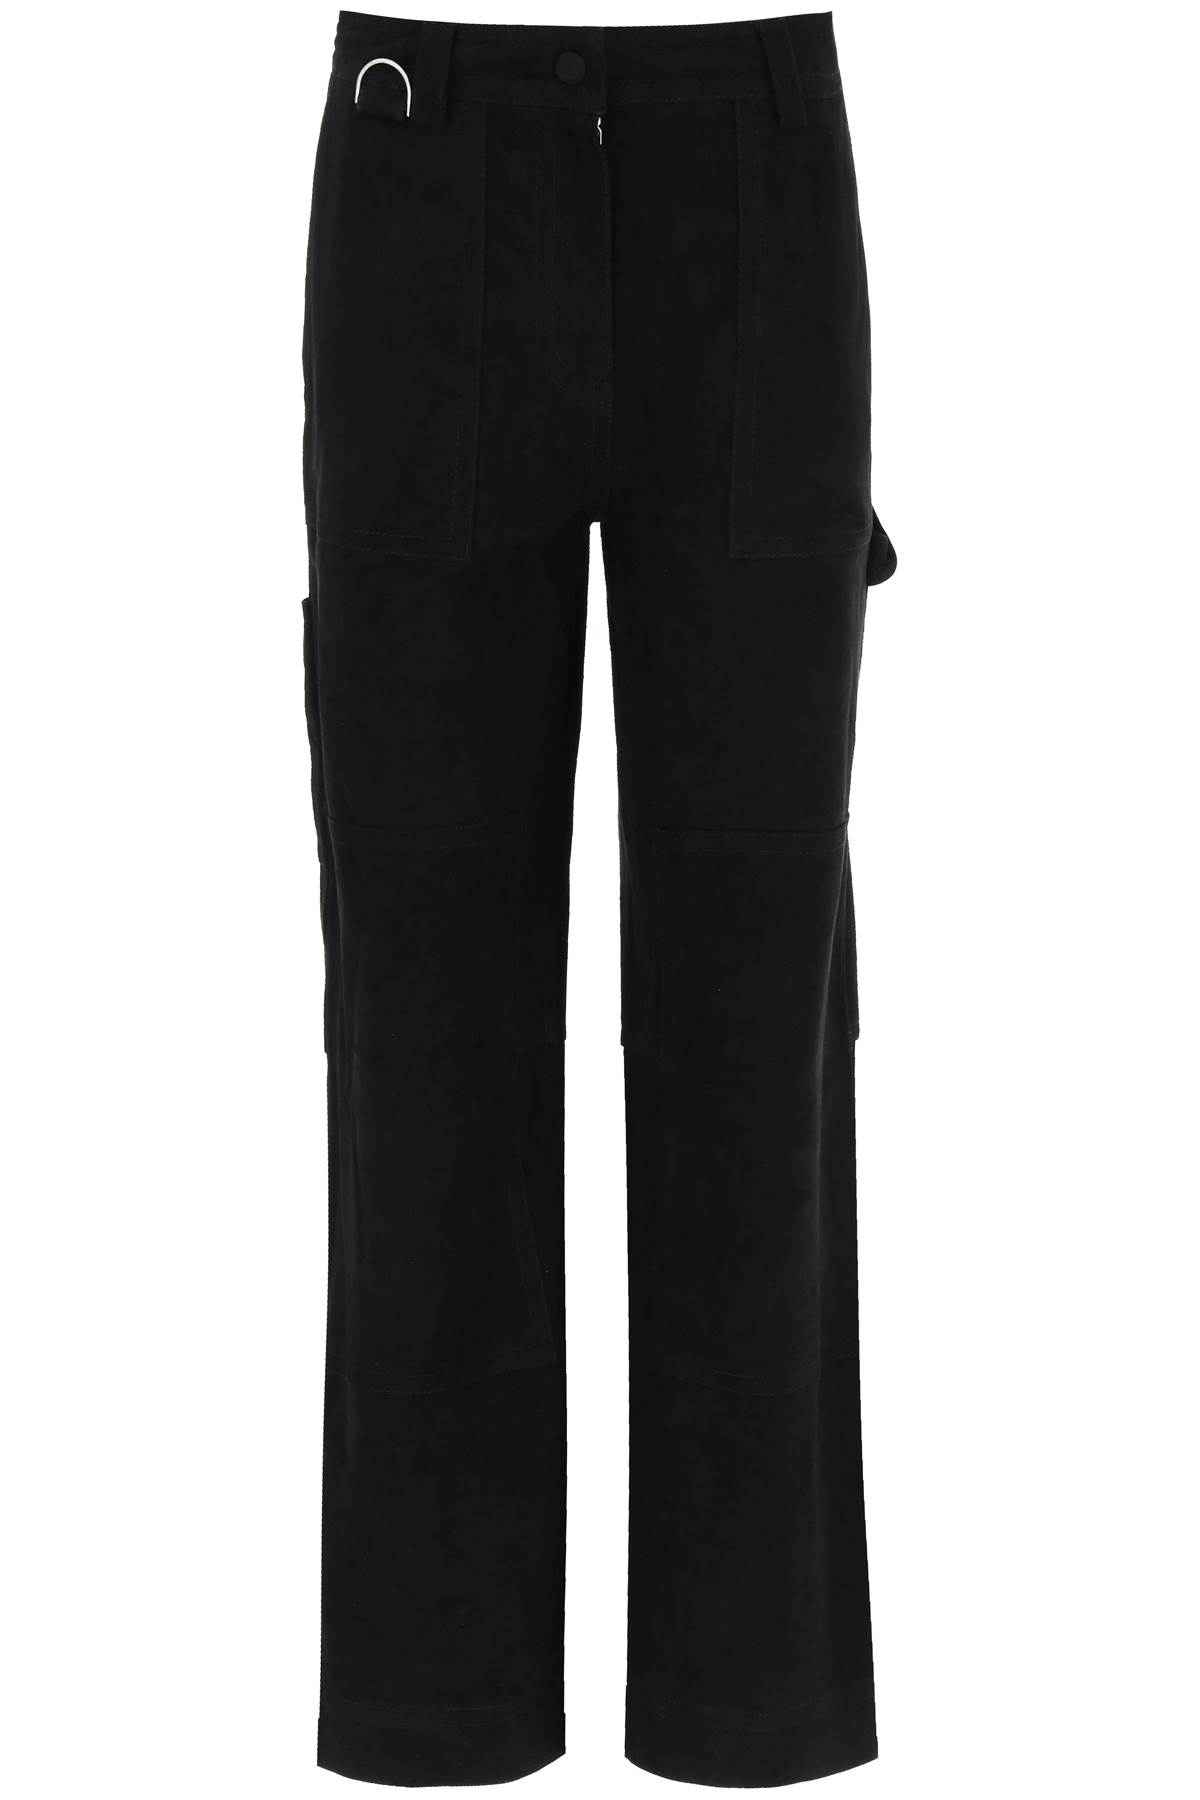 Saks Potts Suede Trousers